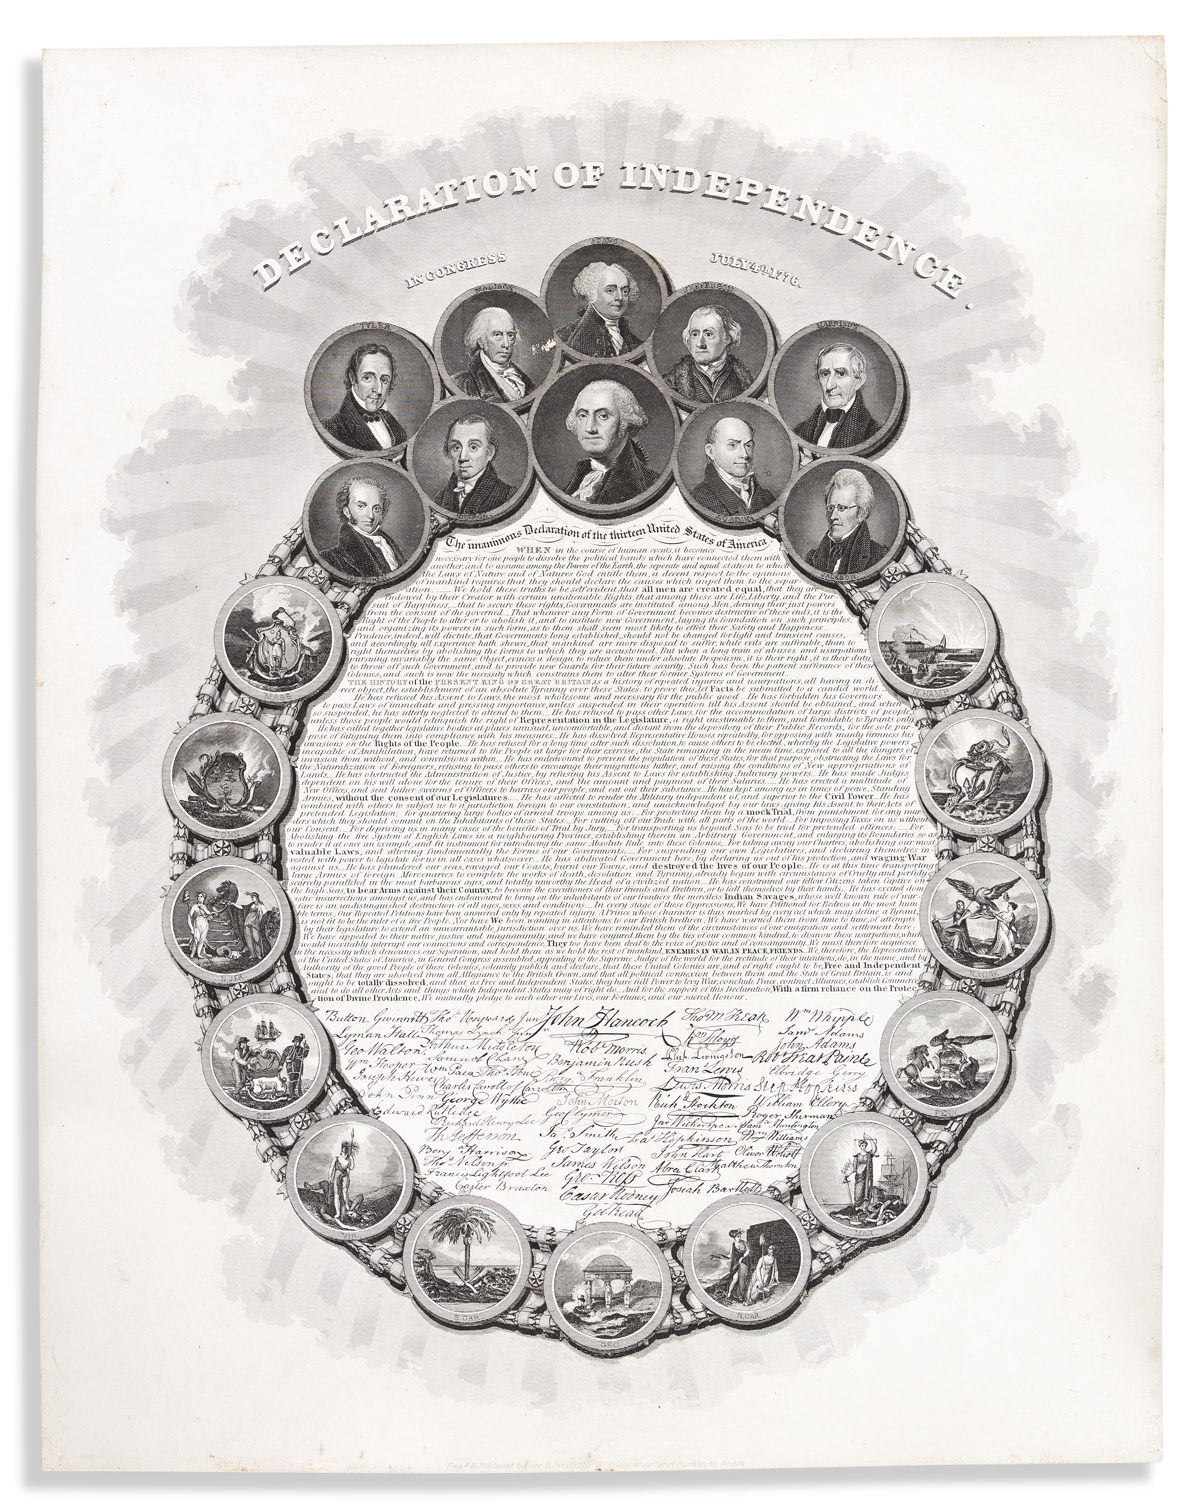 DECLARATION OF INDEPENDENCE.) George G. Smith; engraver. Declaration of Independence, in Congress July 4th 1776.